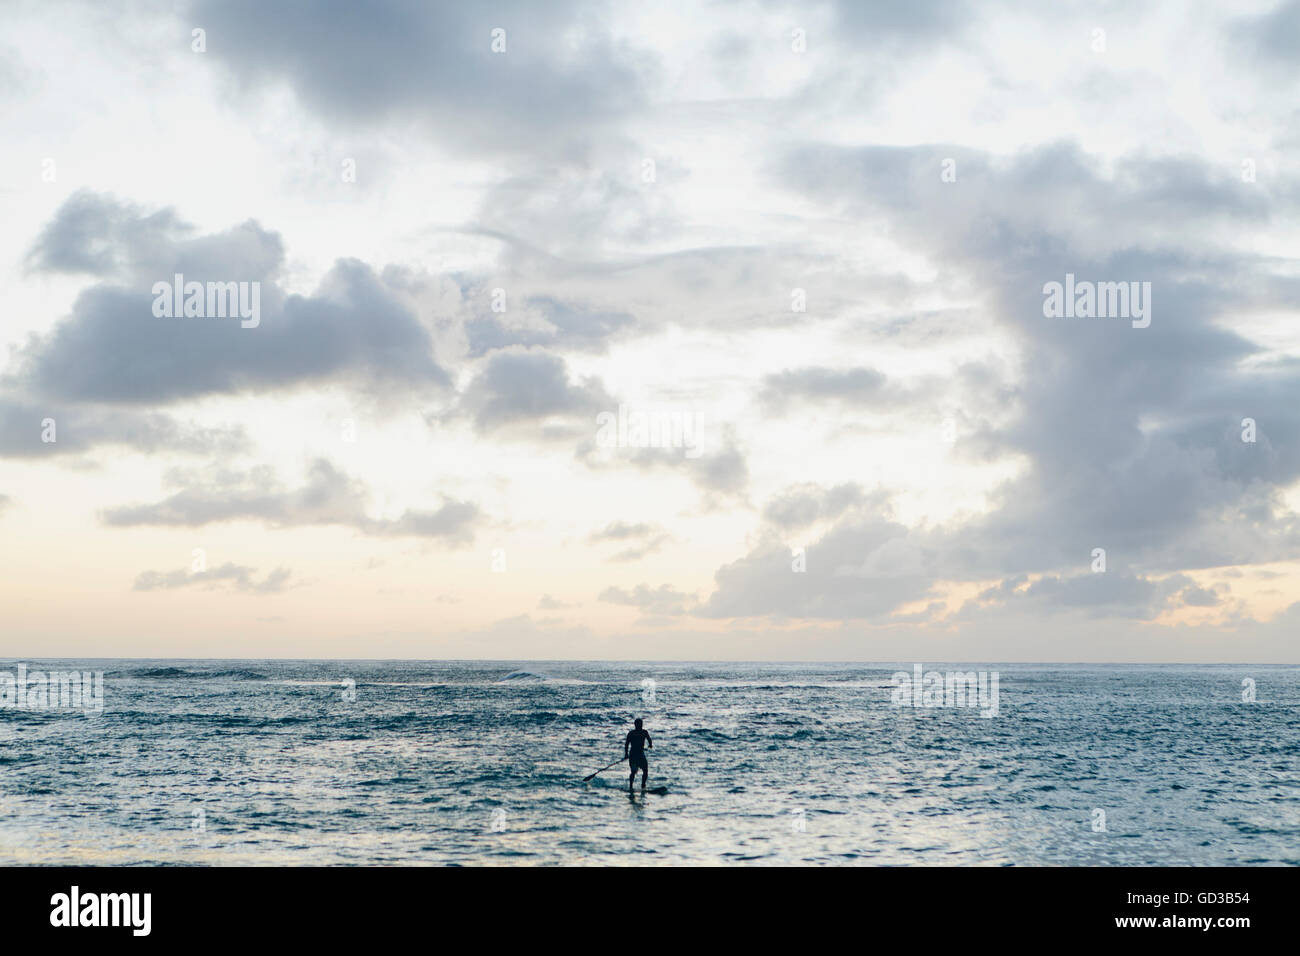 Man stand up paddling in calm waters at dusk Stock Photo